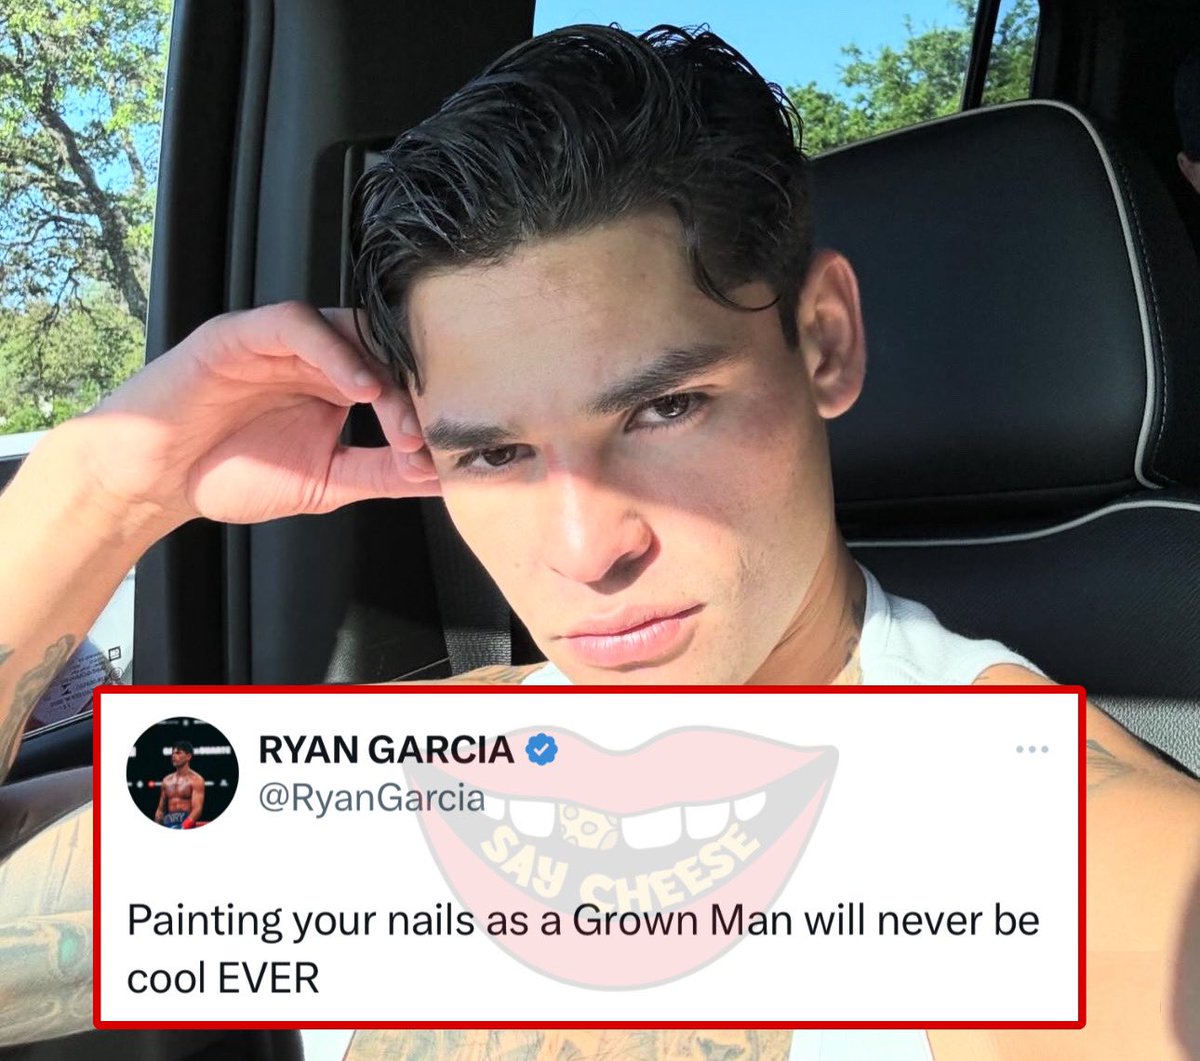 Ryan Garcia speaks on men painting their nails: “Will never be cool EVER”